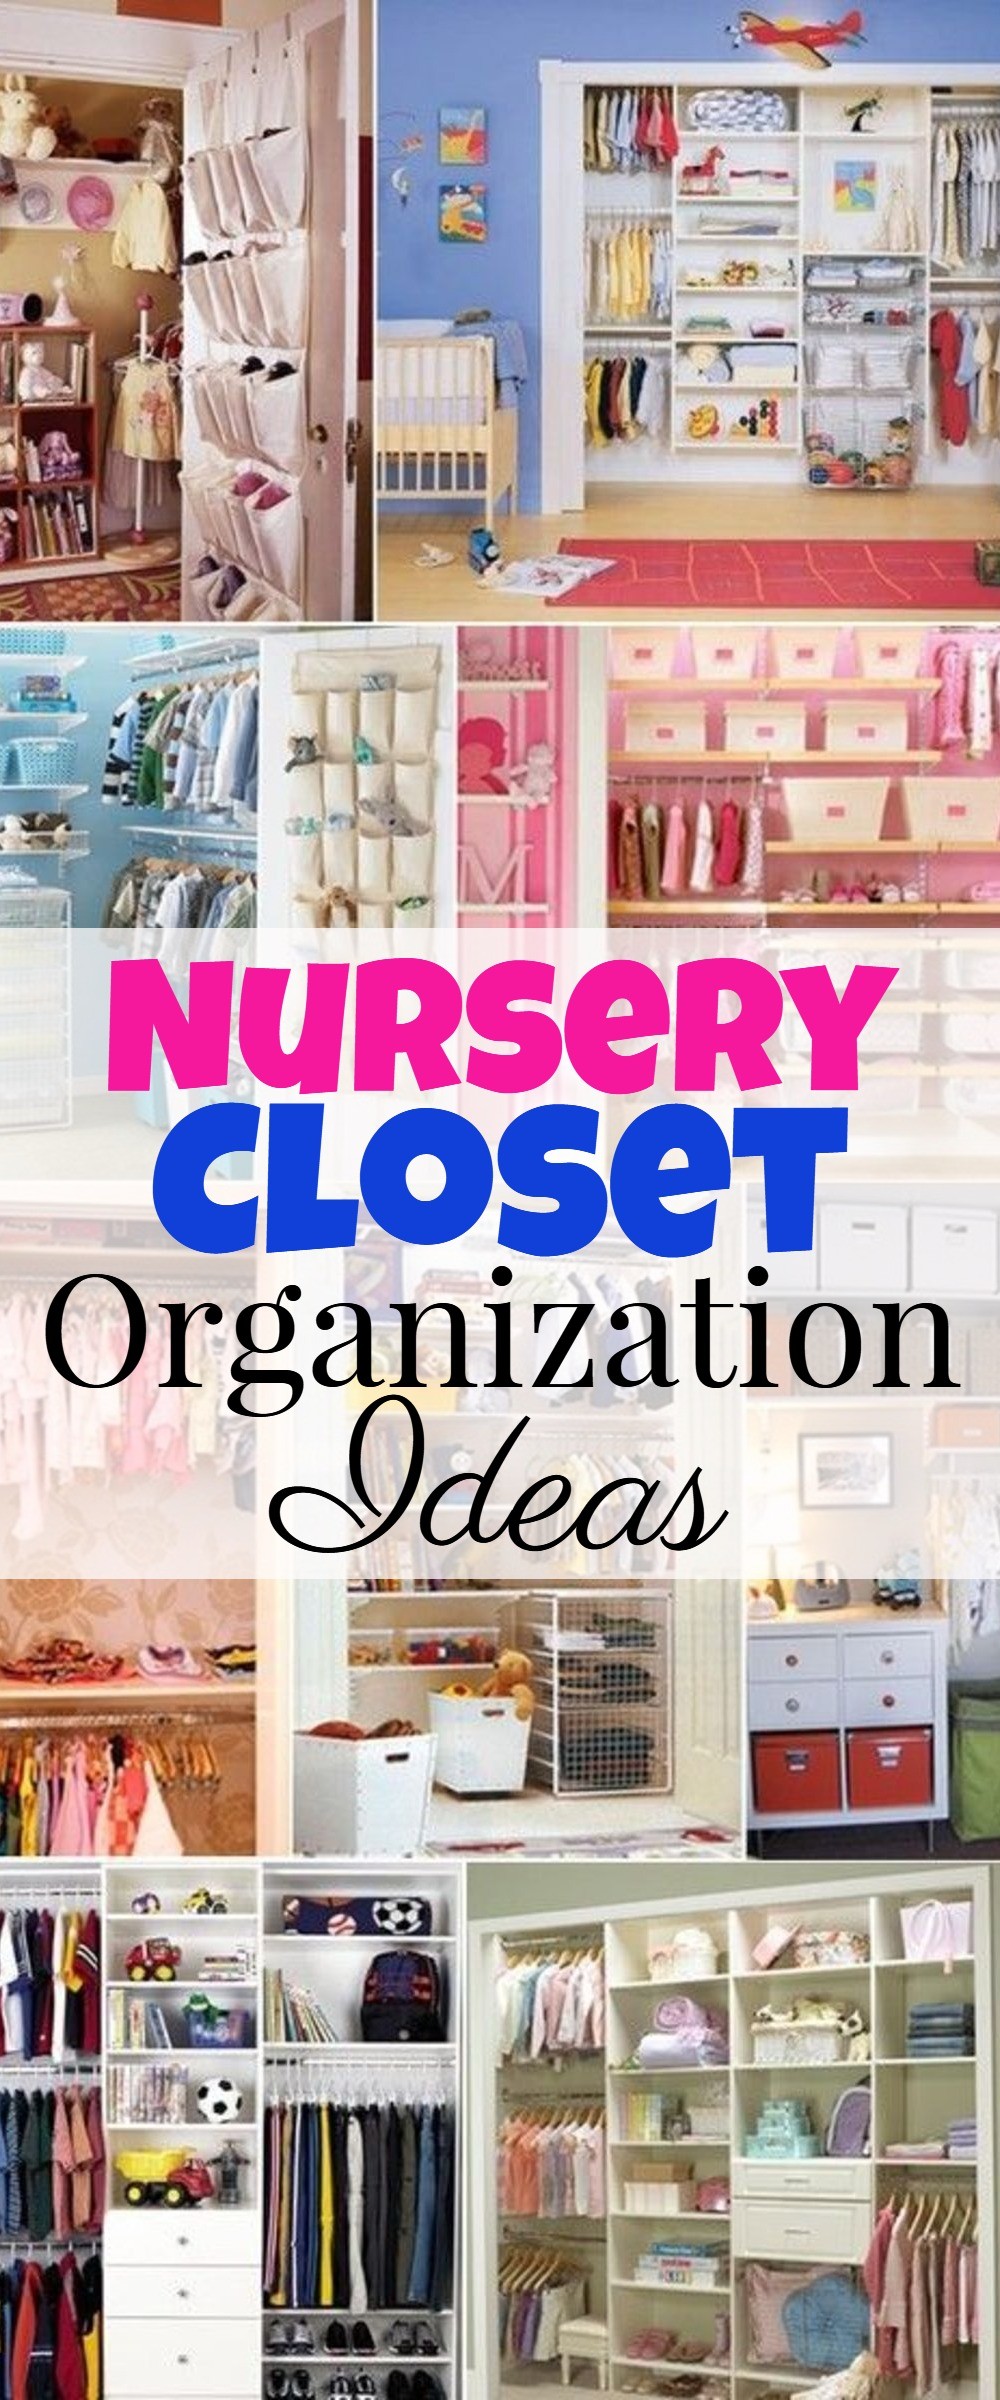 Nursery closet organization tips and ideas - great hacks, DIY ideas, and storage tips for organizing the baby room closet.  Great ideas for big and small closets.